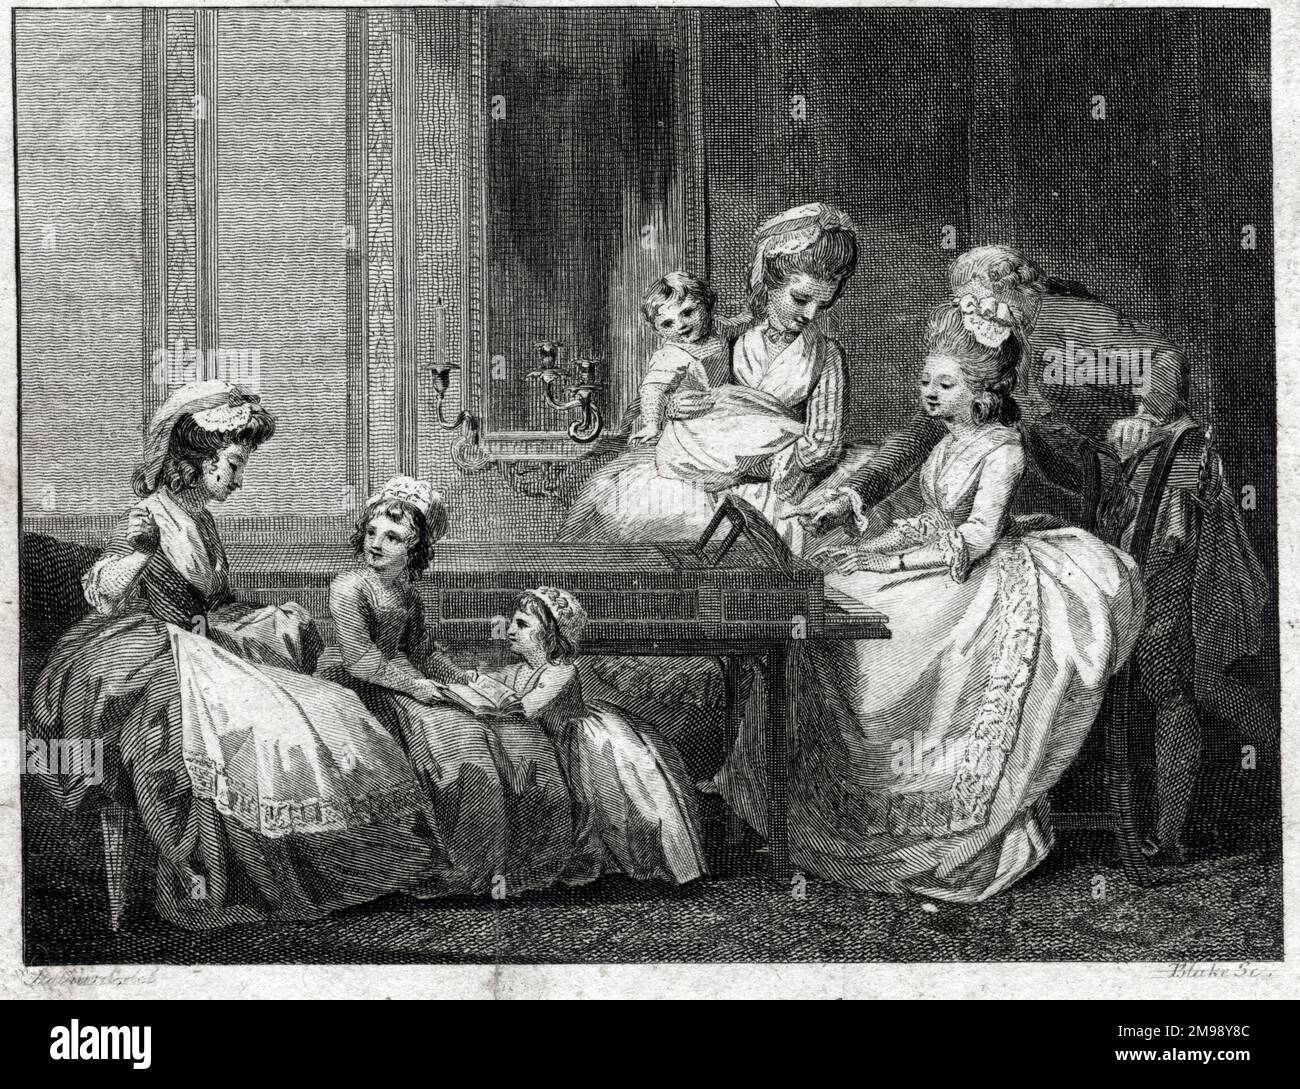 Morning Amusements -- Charlotte, Princess Royal (1766-1828), and her four sisters (Augusta Sophia, Elizabeth, Mary, Sophia), all daughters of King George III. A sixth daughter, Amelia, was born the following year. Stock Photo